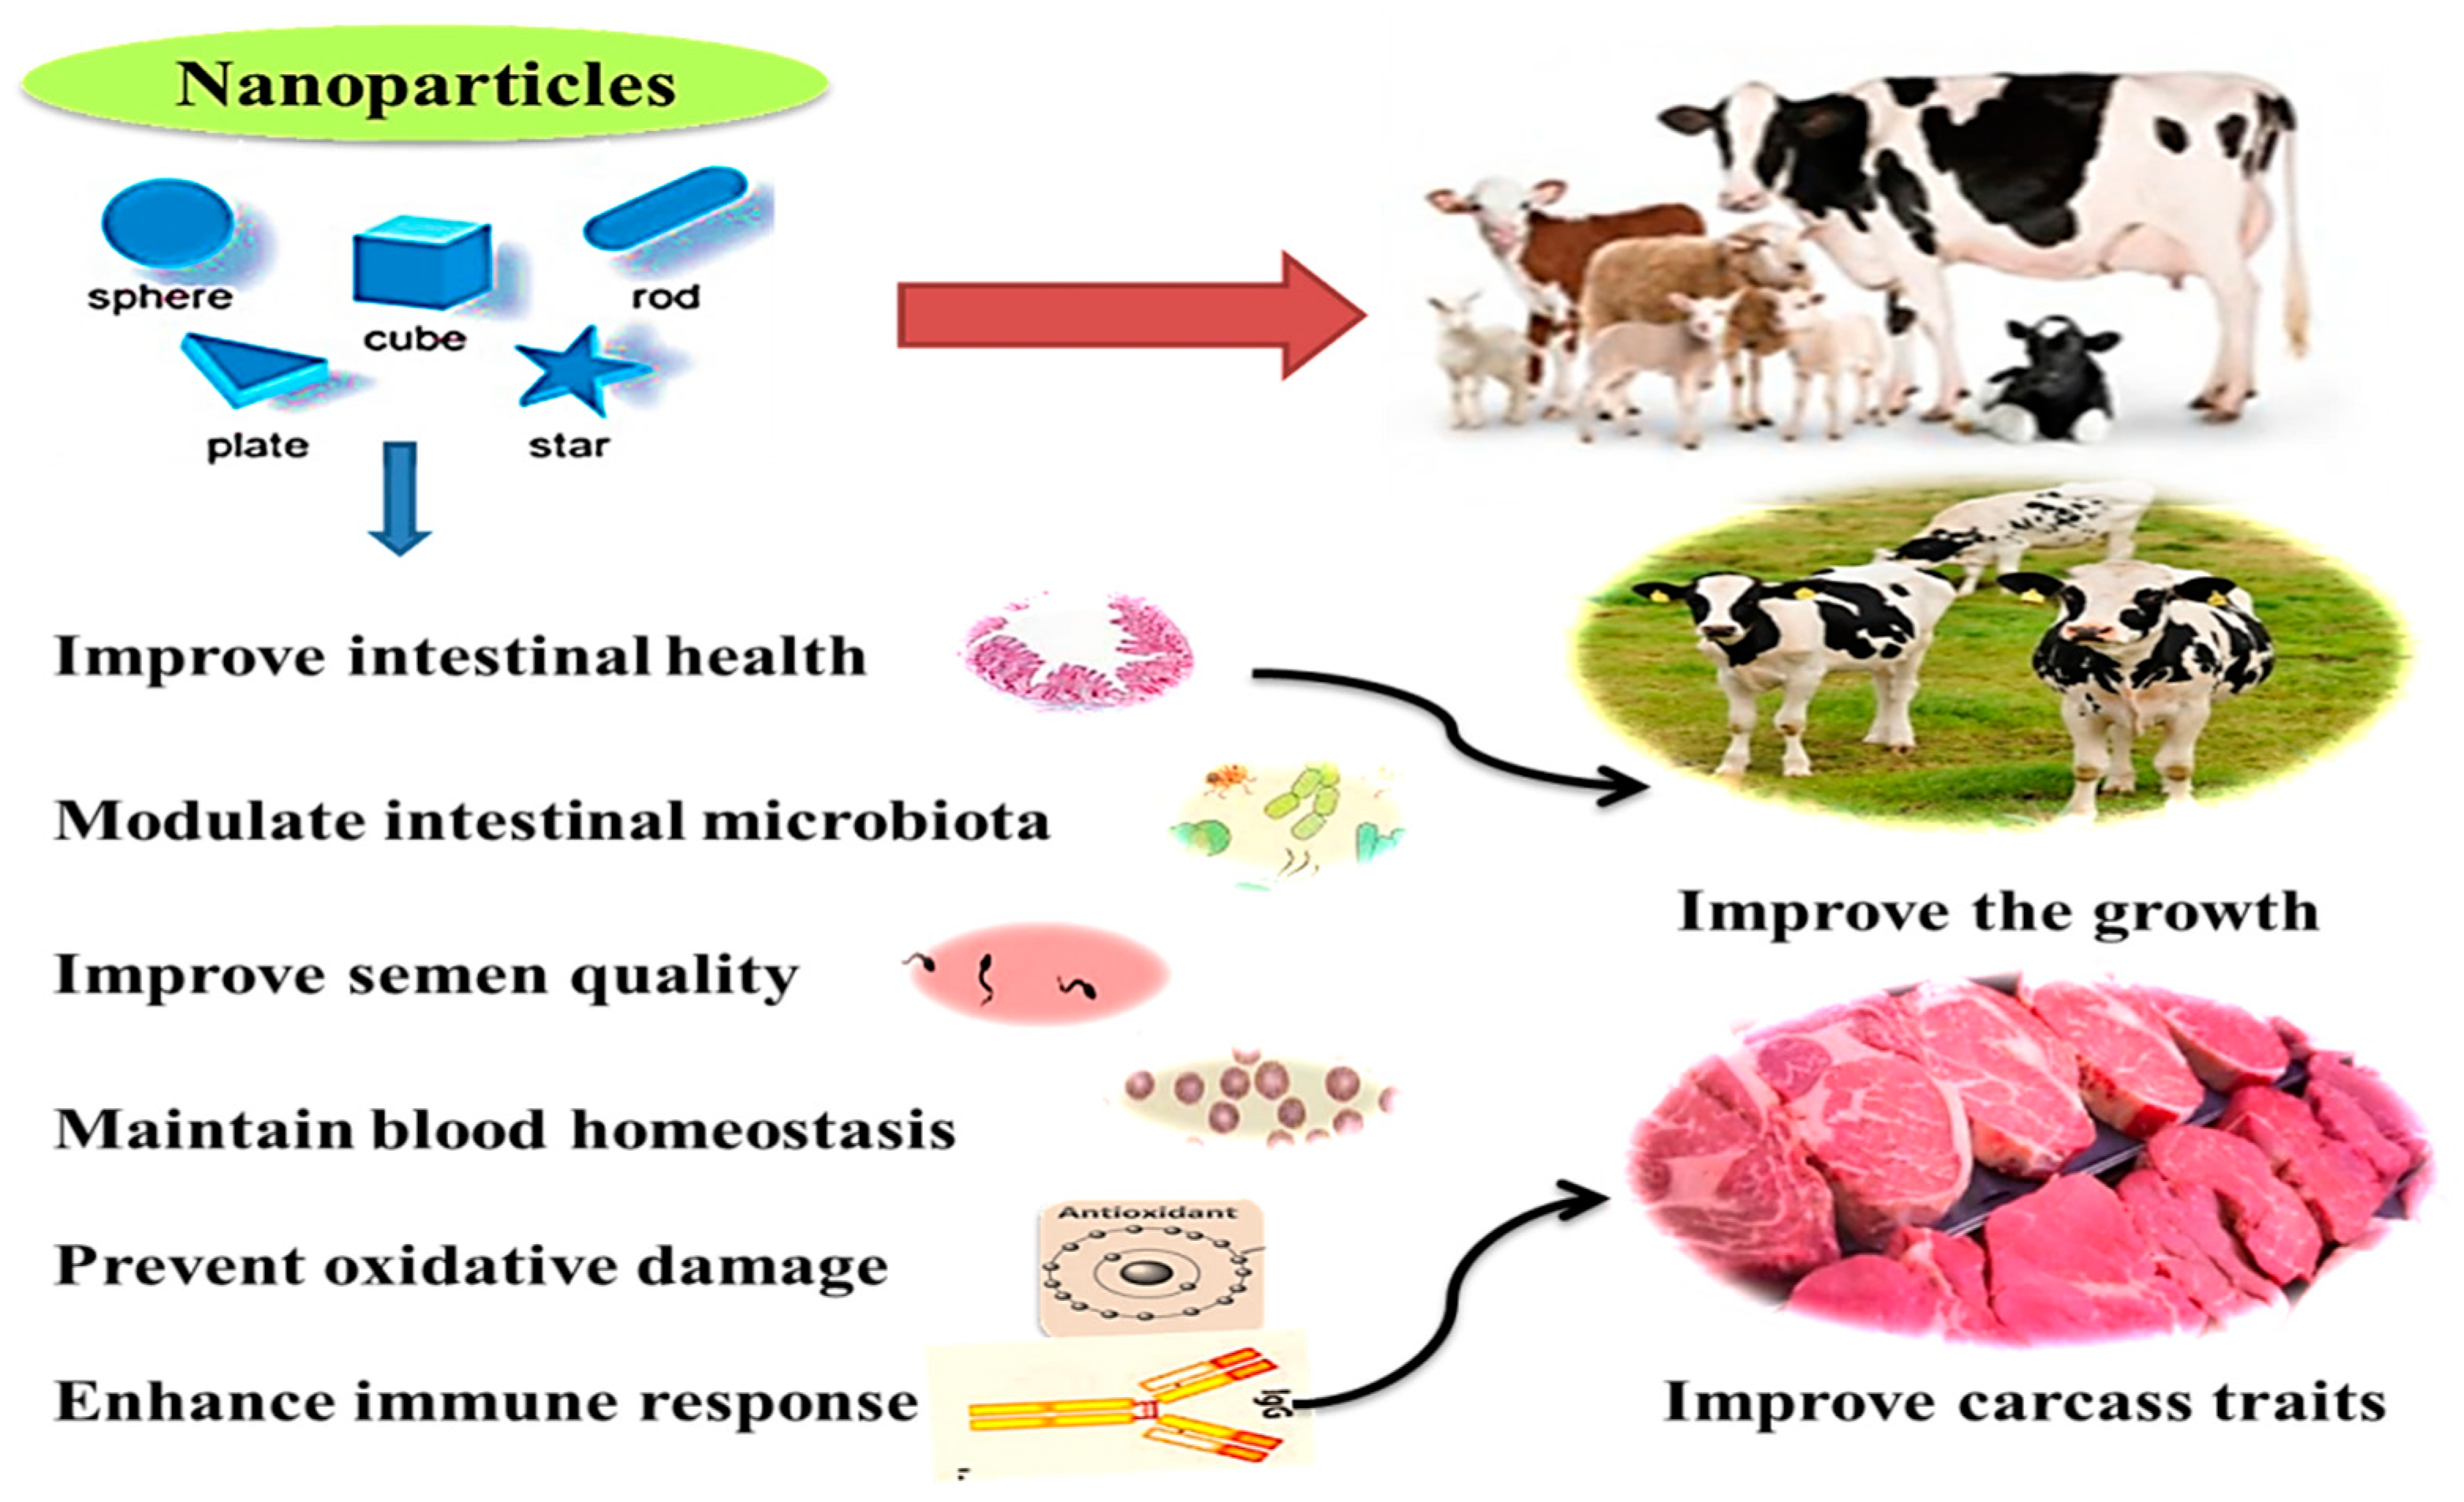 Animals Free Full Text Nanominerals Fabrication Methods Benefits And Hazards And Their Applications In Ruminants With Special Reference To Selenium And Zinc Nanoparticles